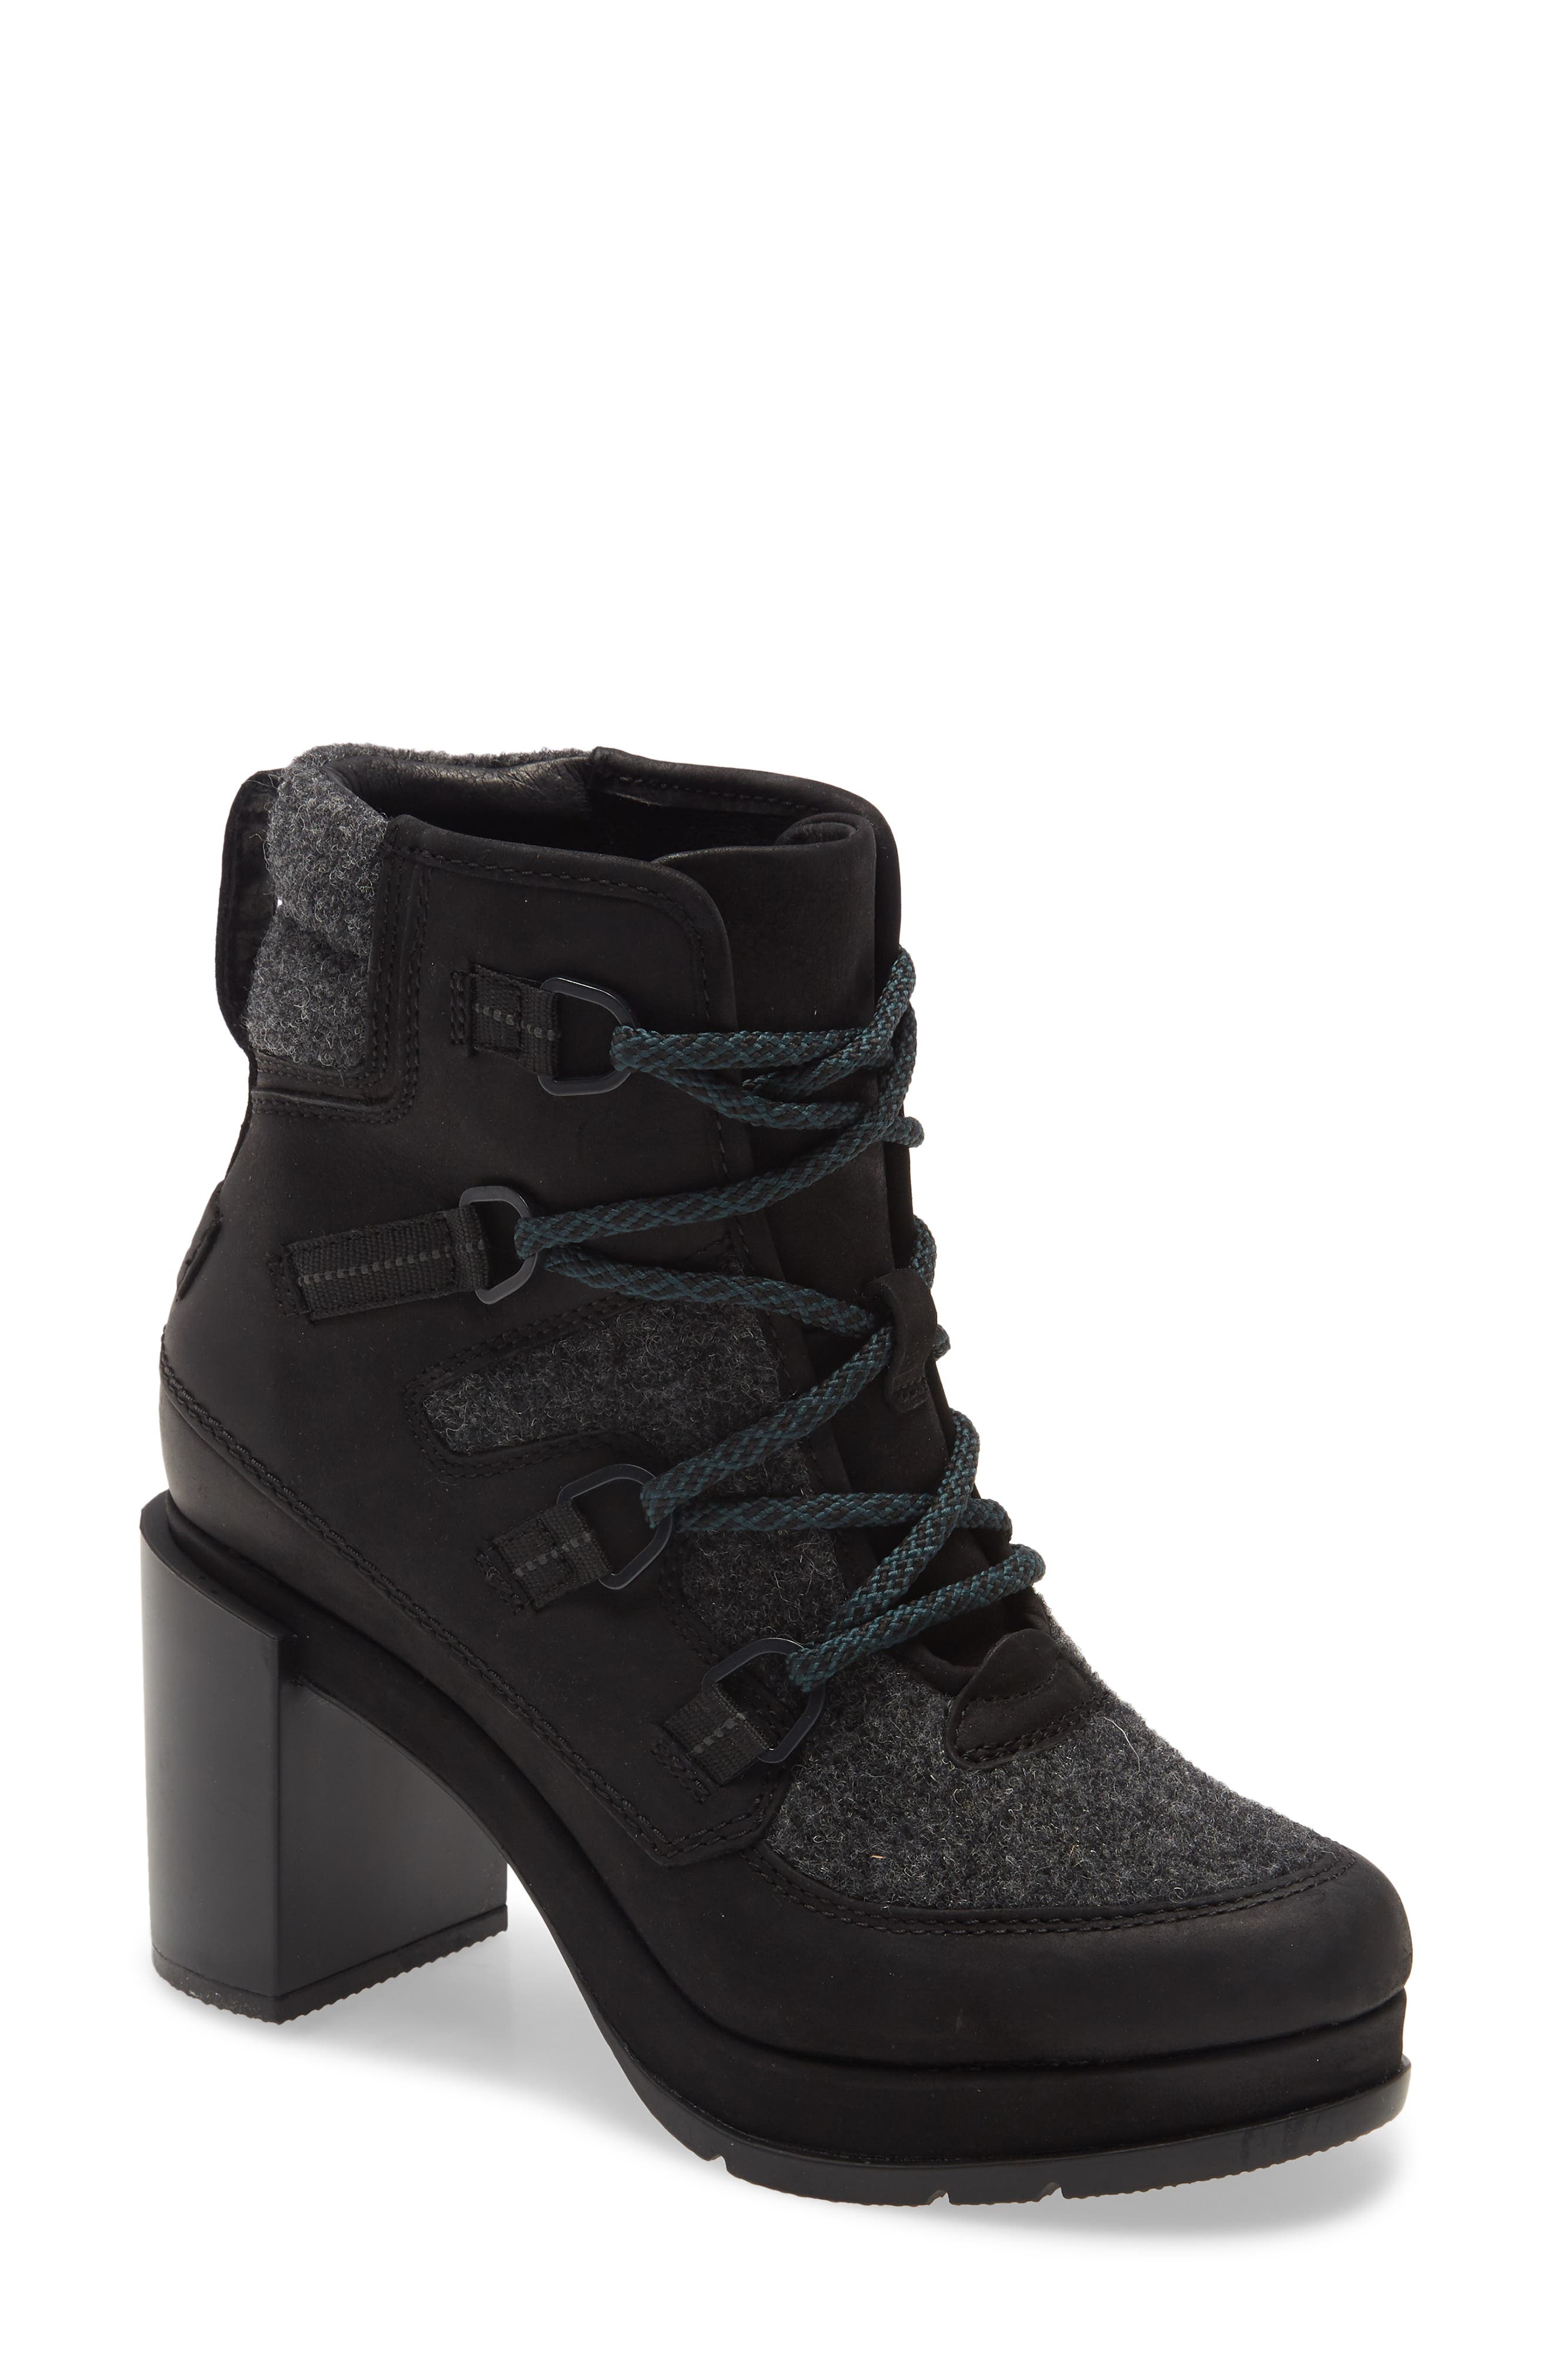 blake lace up boots topshop